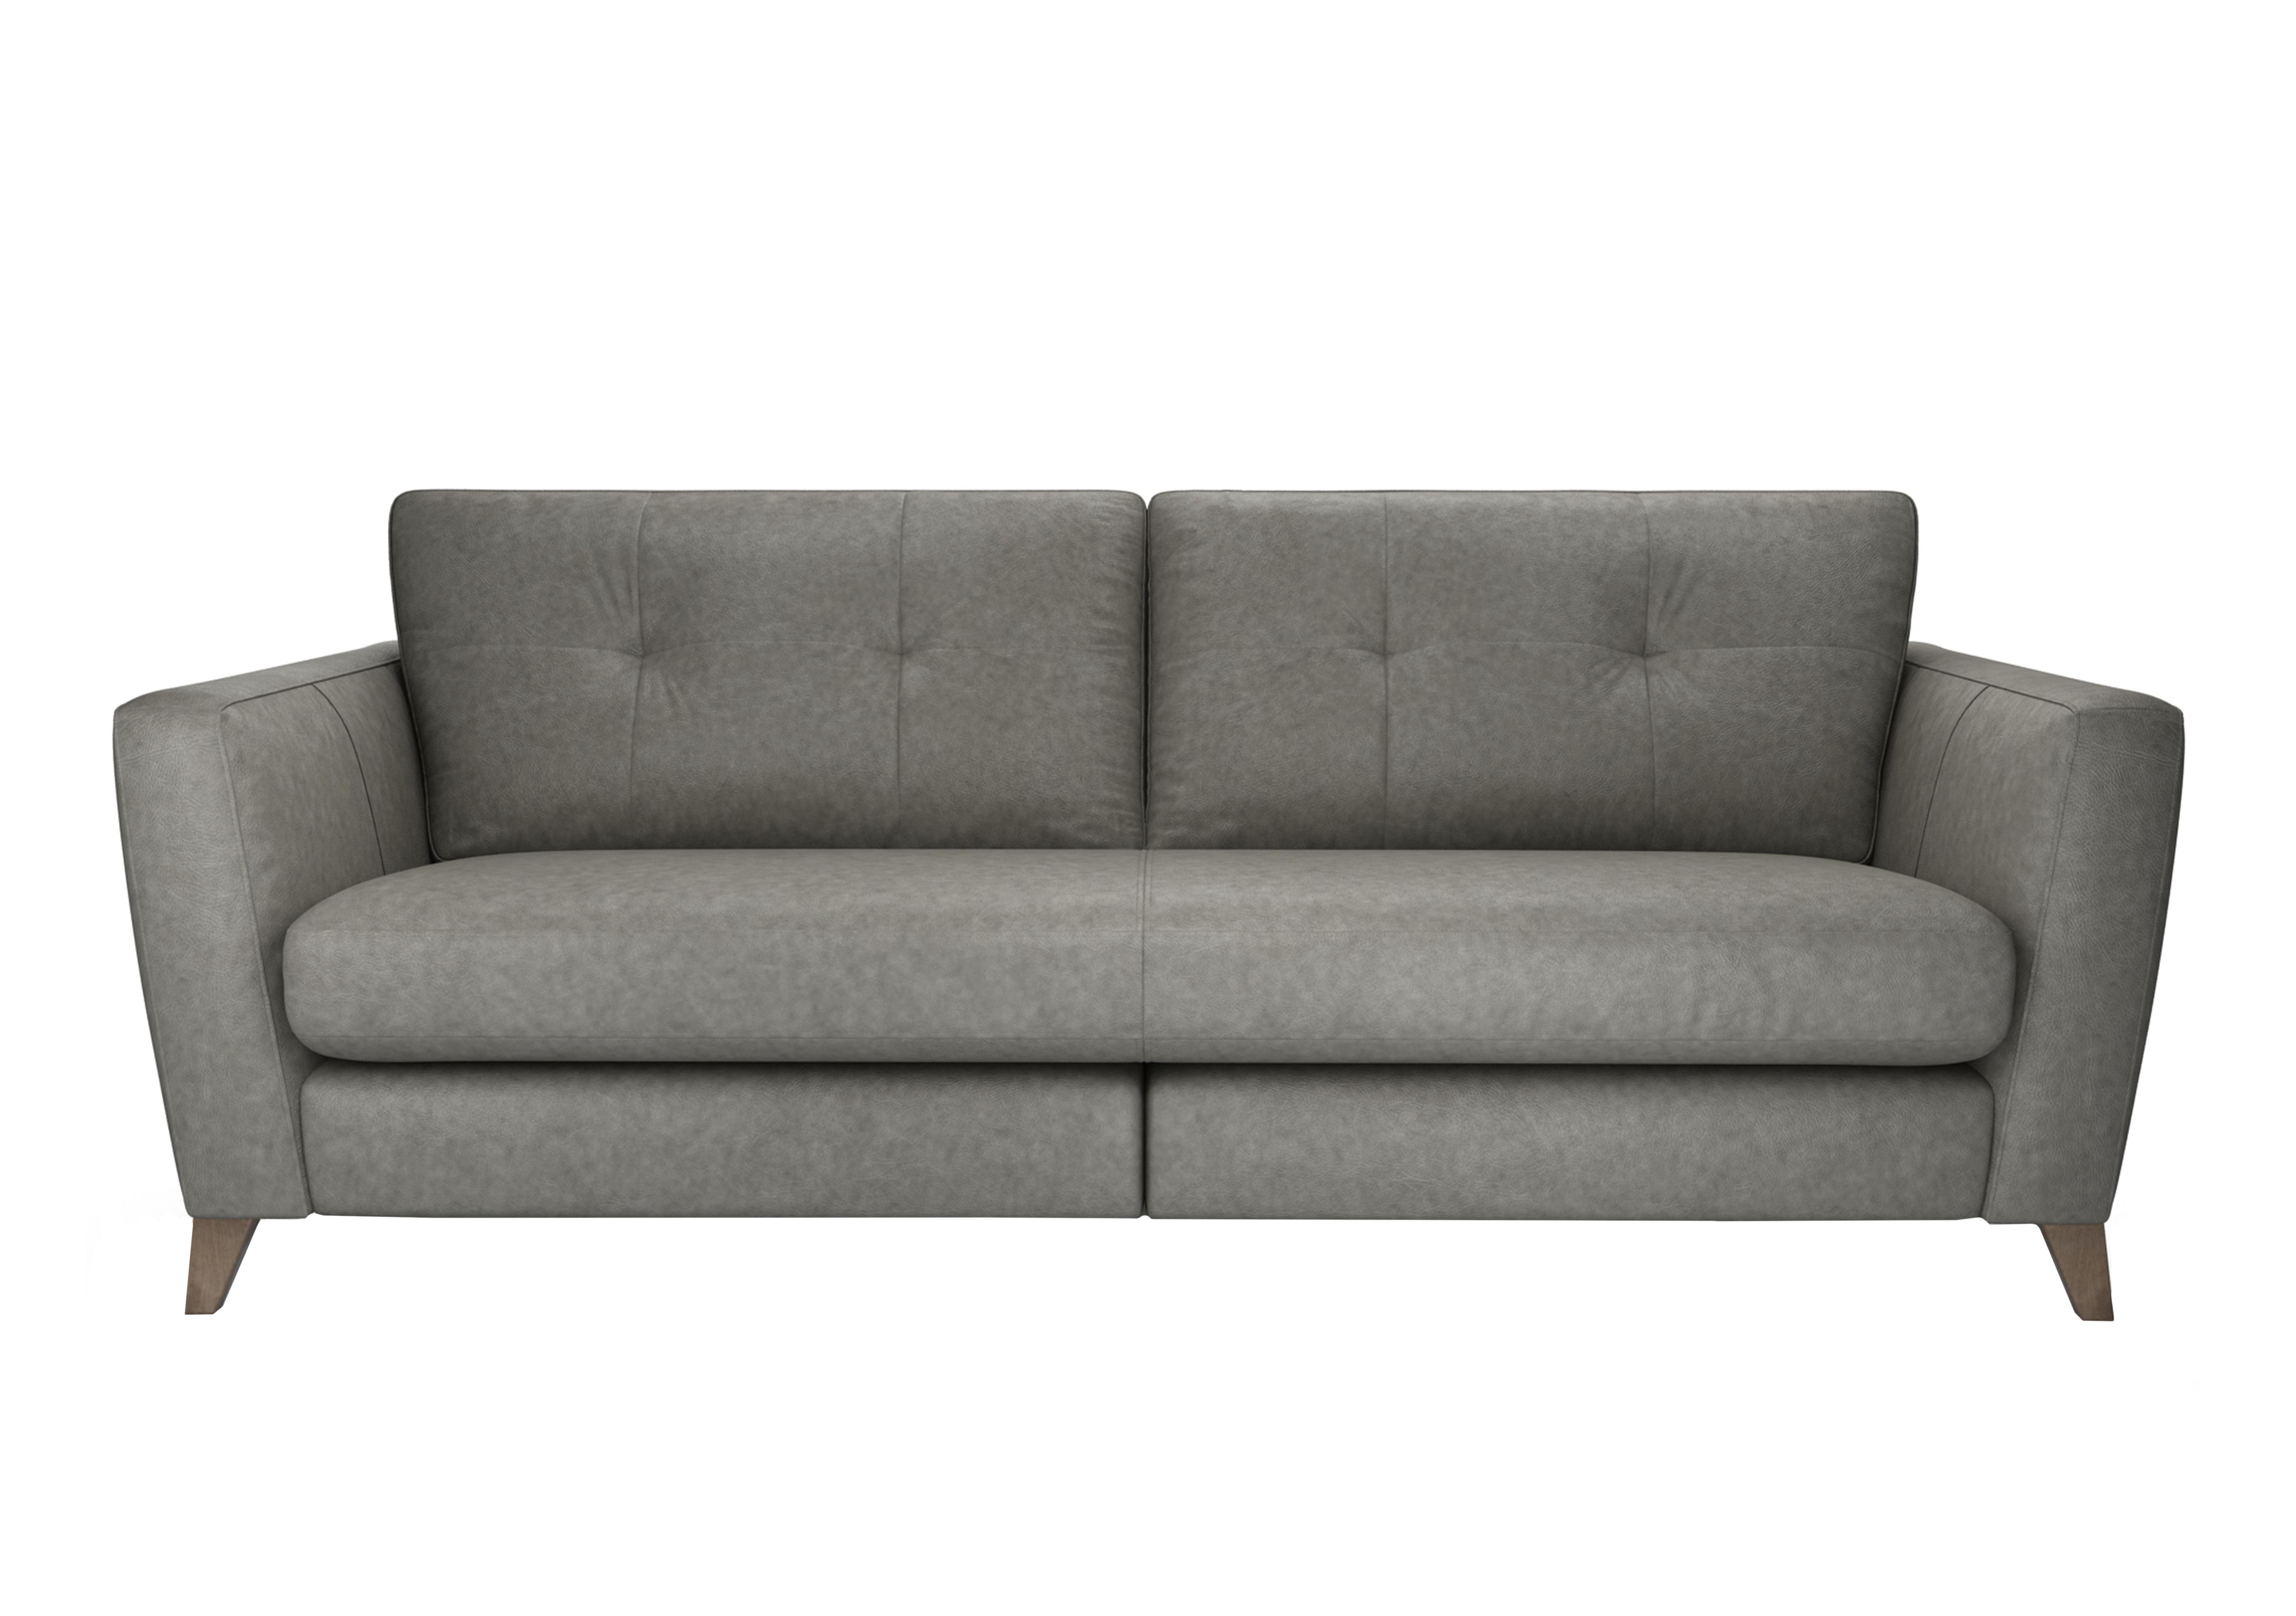 Hermione 4 Seater Leather Sofa in Amo191 Amonite Wo Ft on Furniture Village